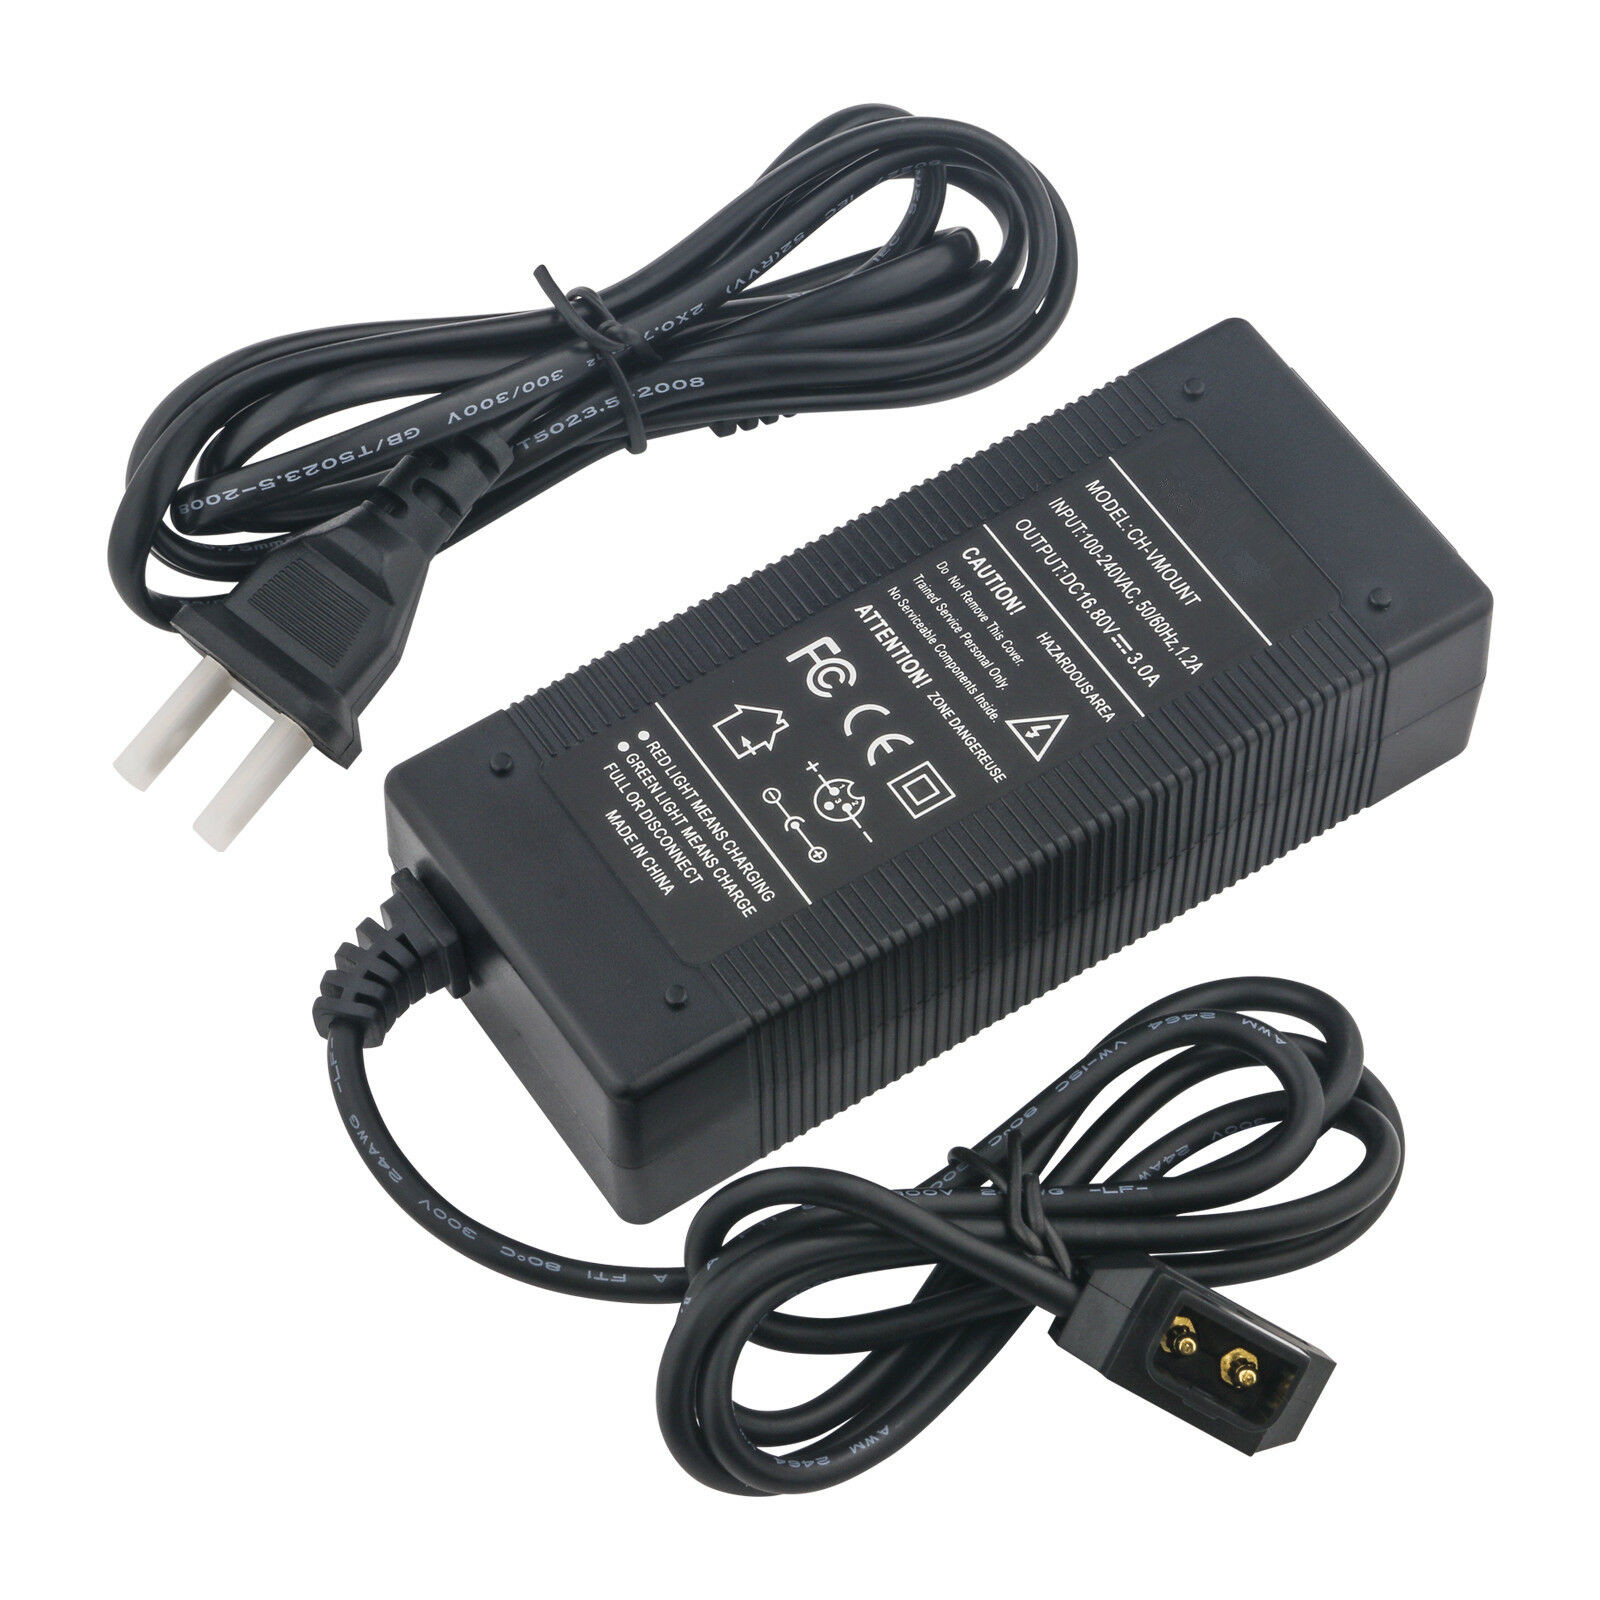 SONY BVW-400A battery charger